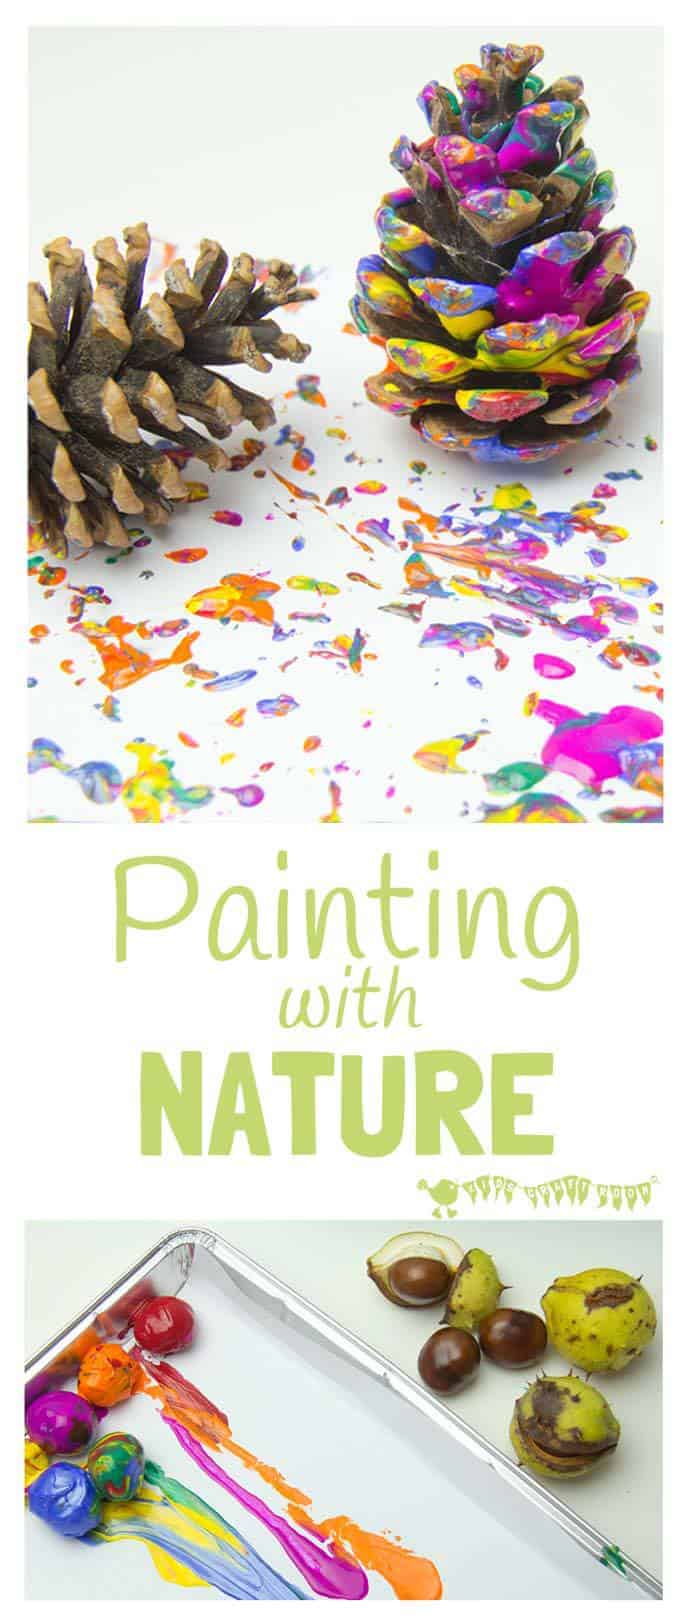 Autumn painting with nature is an exciting process art technique for kids that explores textures and patterns in a fun and open-ended way.